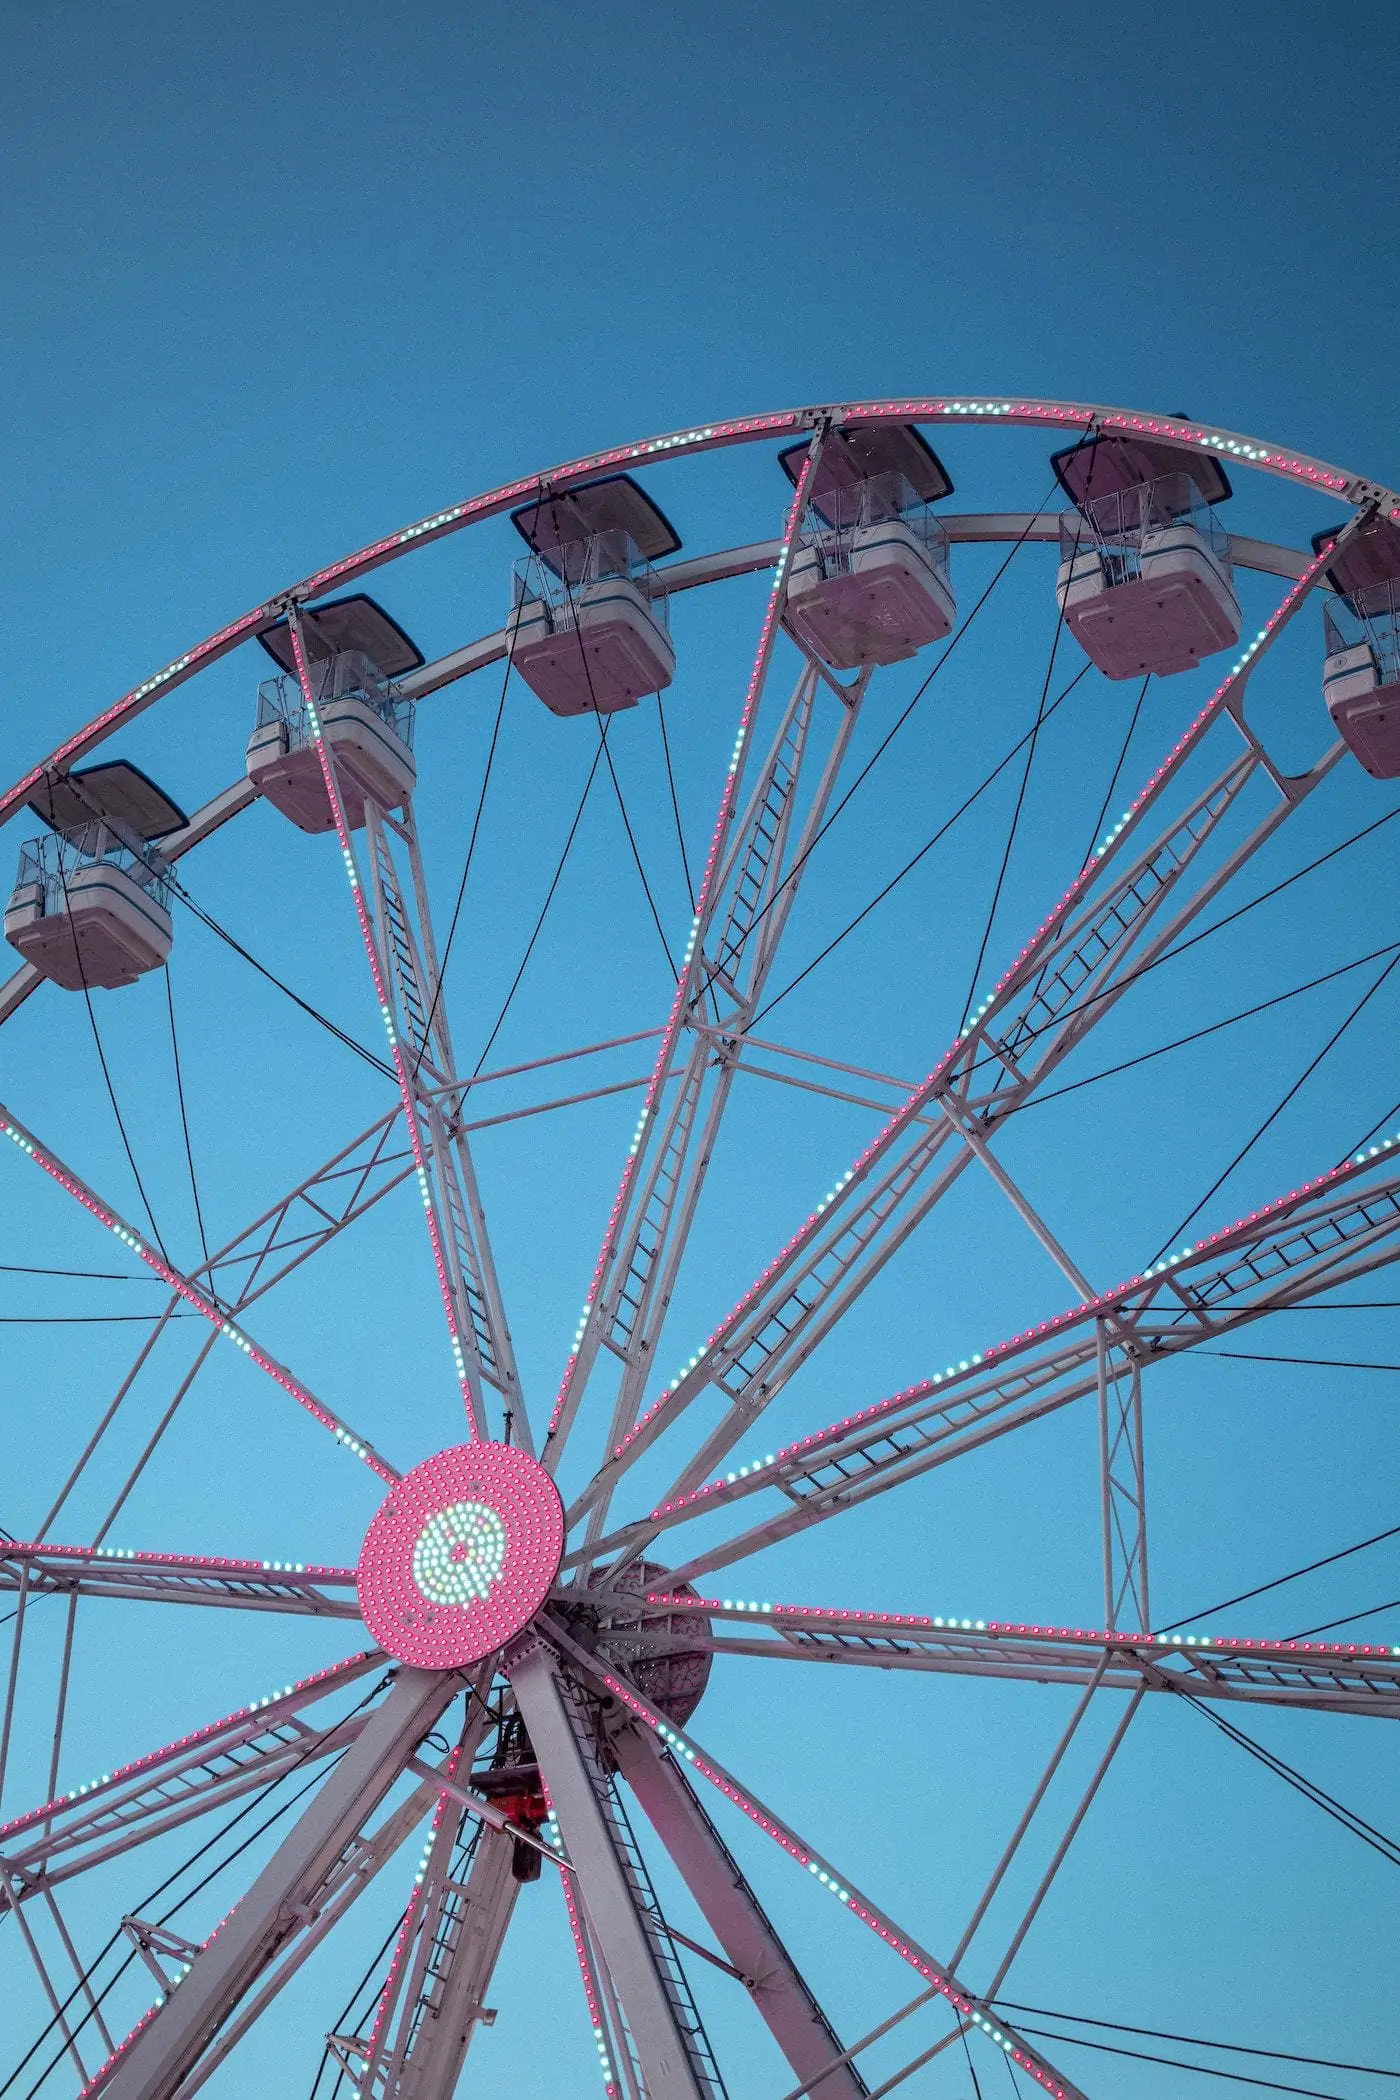 ferris wheel and blue sky photo example with canon m50